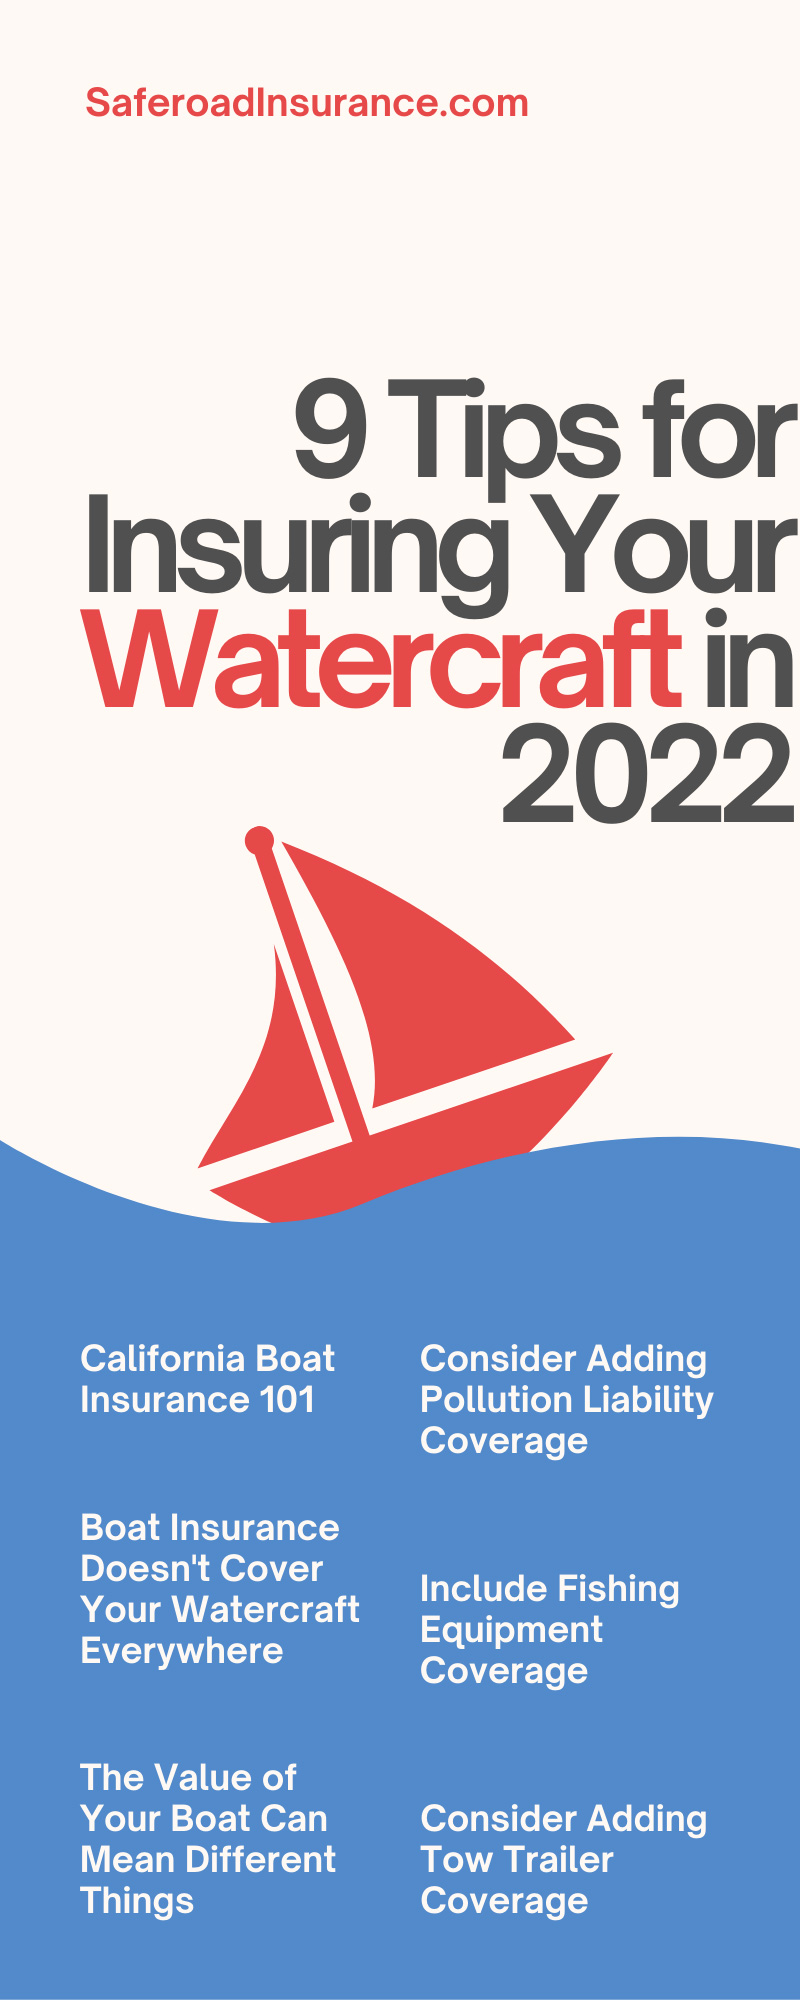 9 Tips for Insuring Your Watercraft in 2022